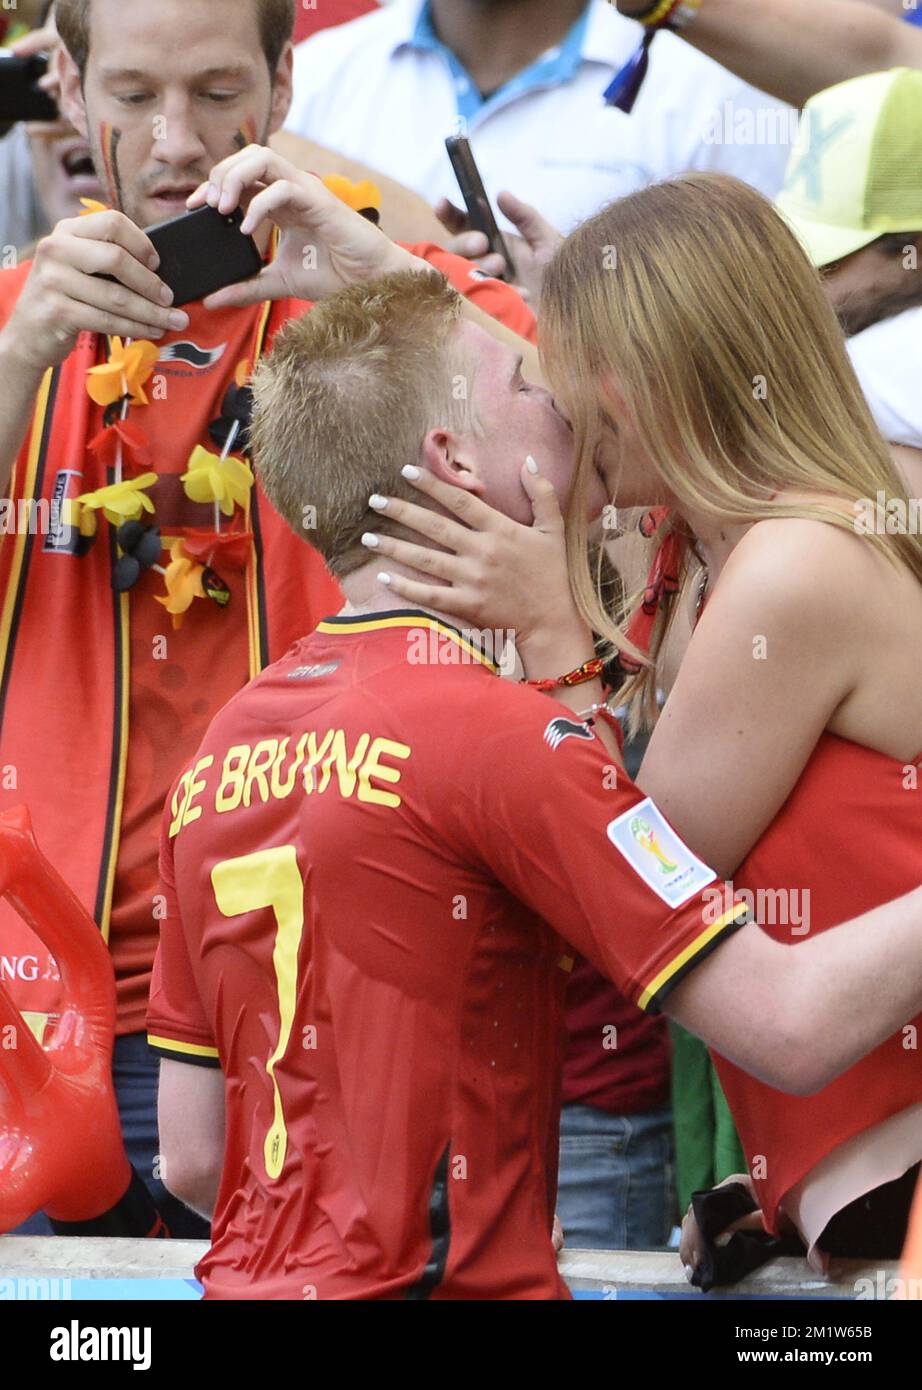 20140622 - RIO DE JANEIRO, BRAZIL: Belgium's Kevin De Bruyne celebrates with his girlfriend Michele Lacroix after winning a soccer game between Belgian national team The Red Devils and Russia in Rio de Janeiro, Brazil, the second game in Group H of the first round of the 2014 FIFA World Cup, Sunday 22 June 2014.   BELGA PHOTO DIRK WAEM Stock Photo